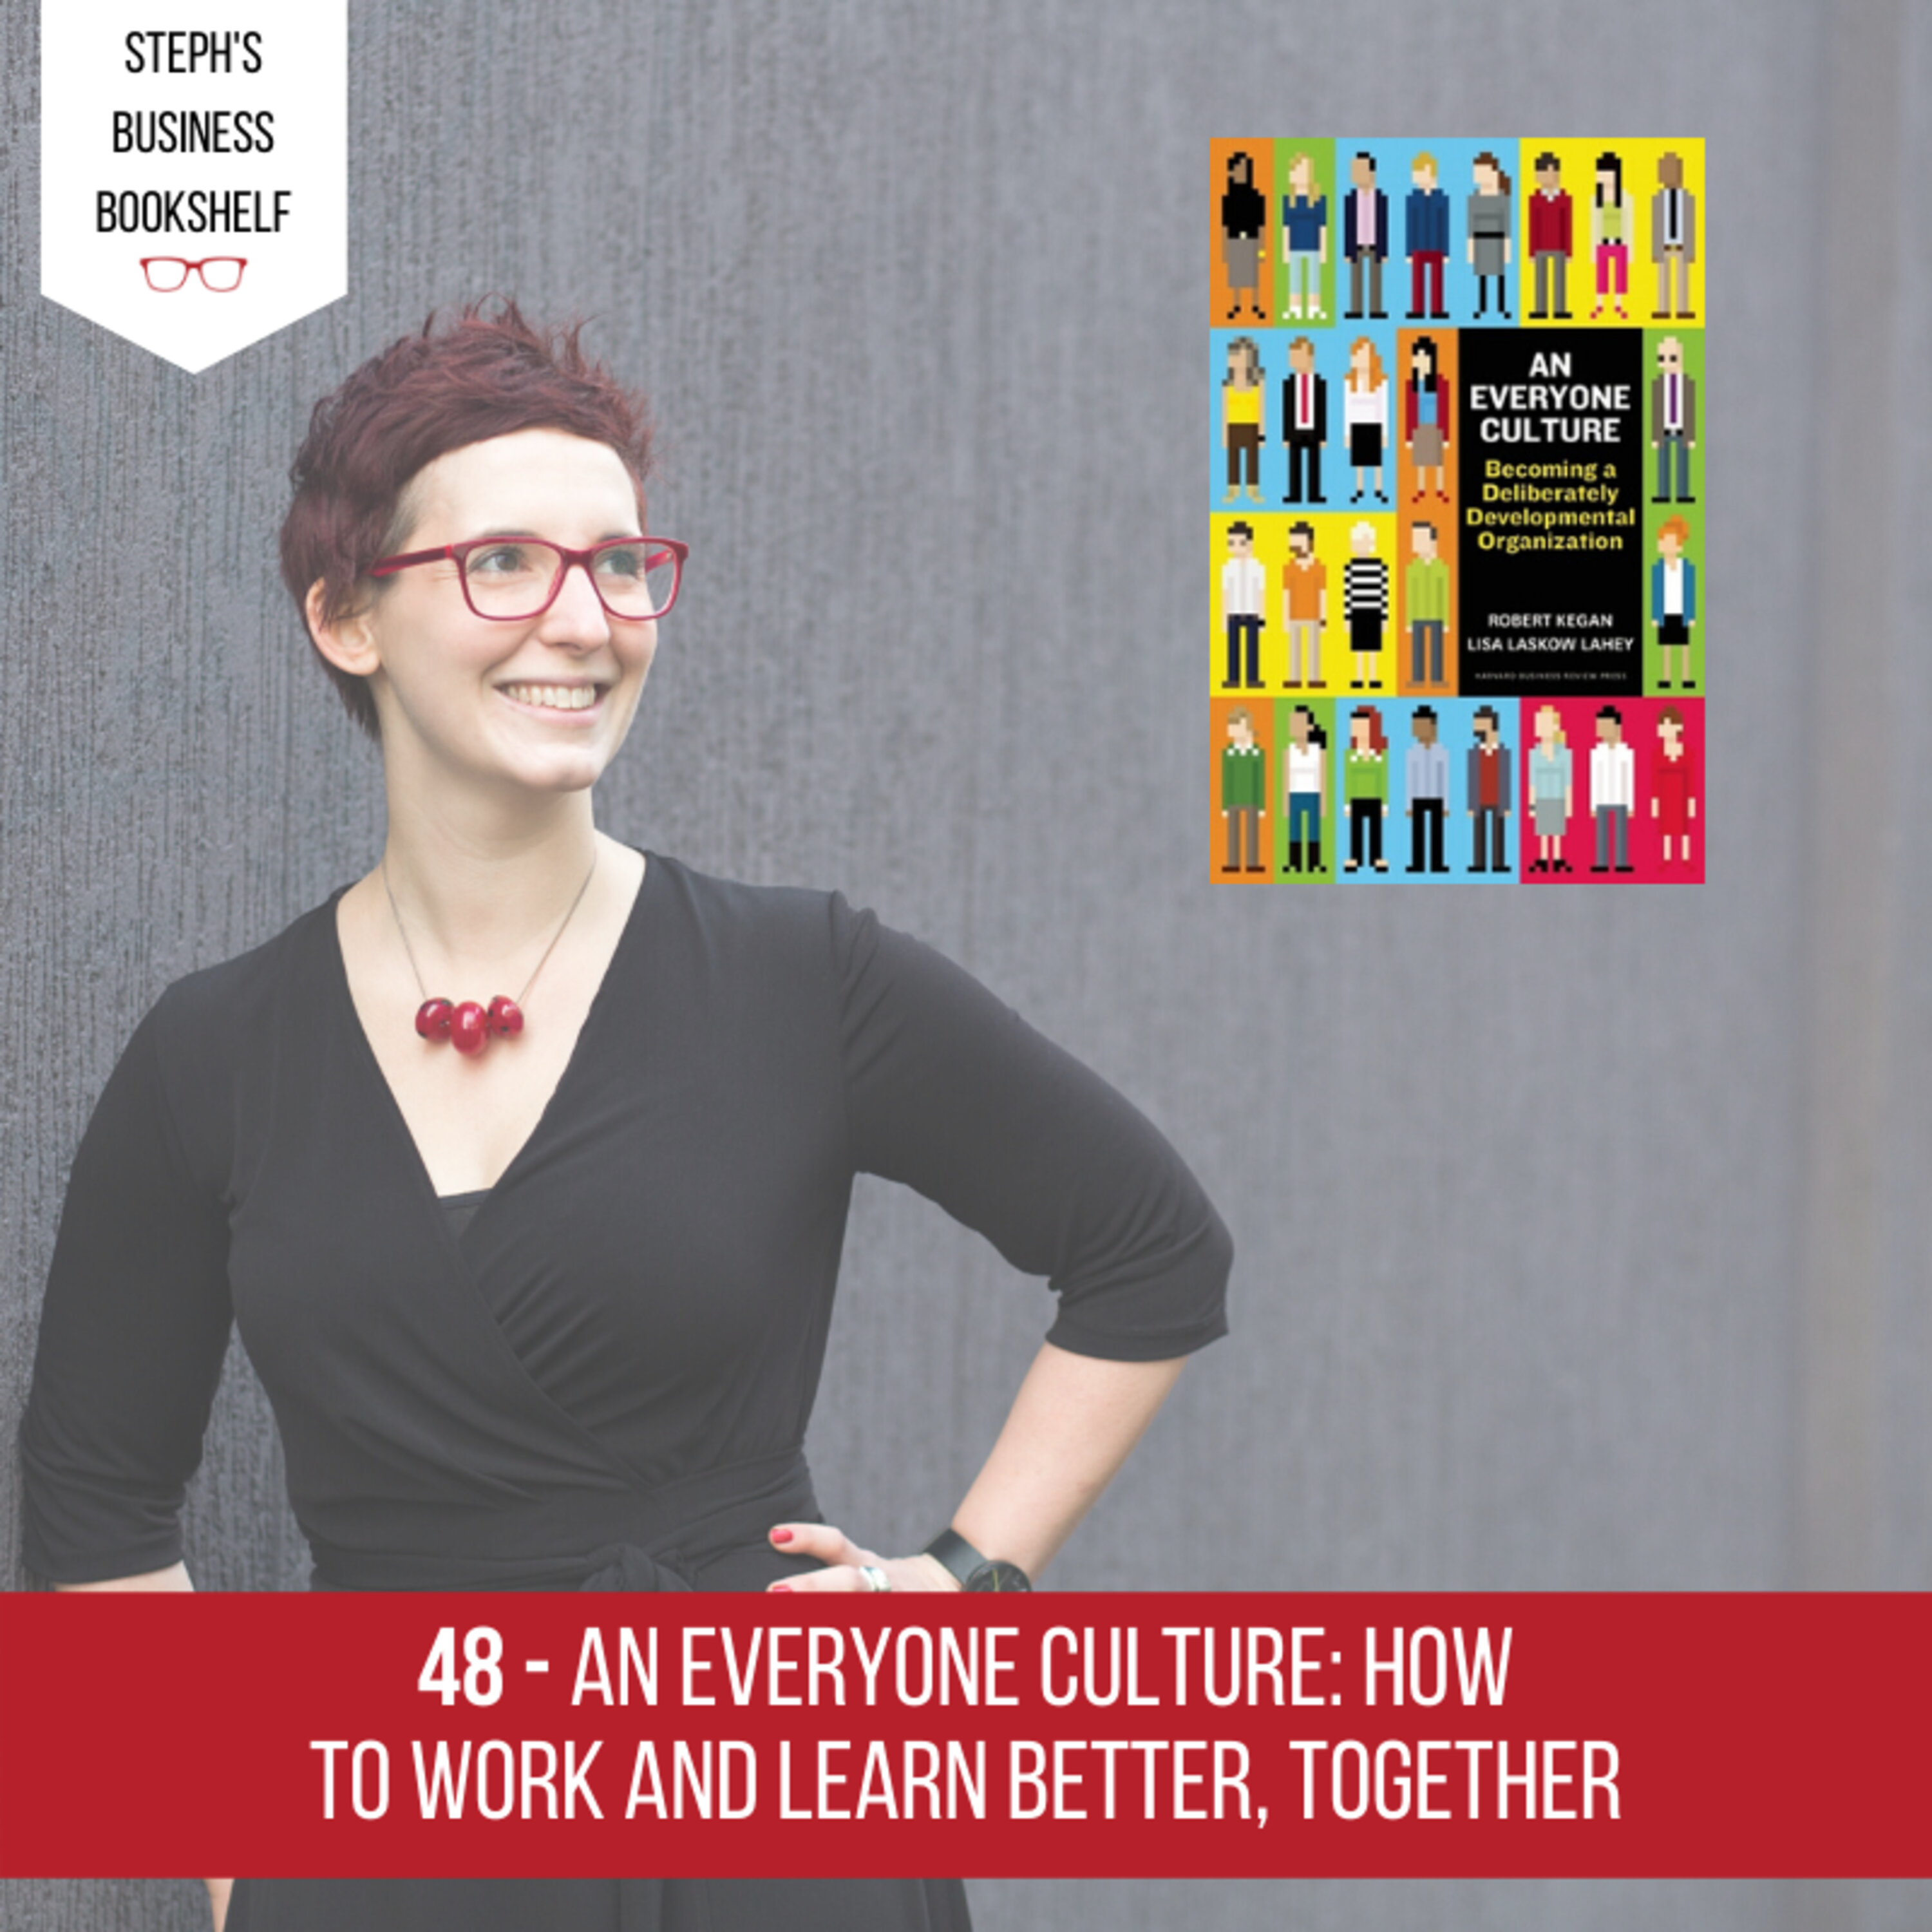 An Everyone Culture by Robert Kegan & Lisa Lahey: How to Work And Learn Better, Together Image